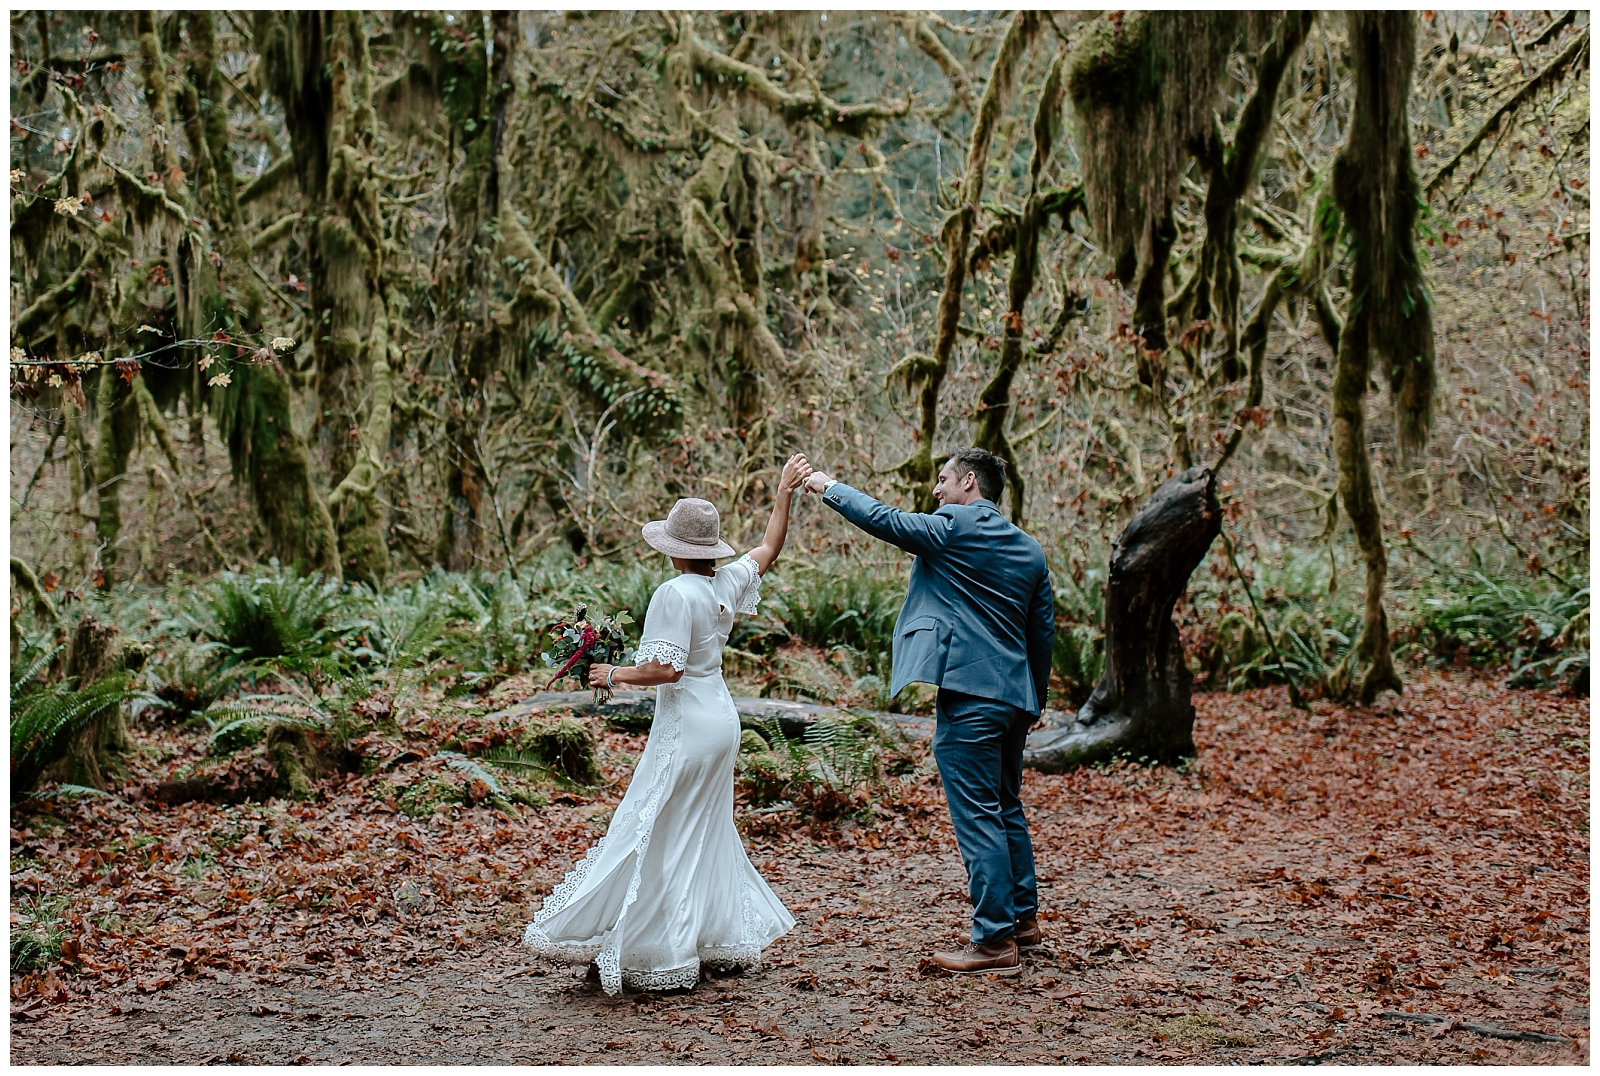 how to elope in washington state